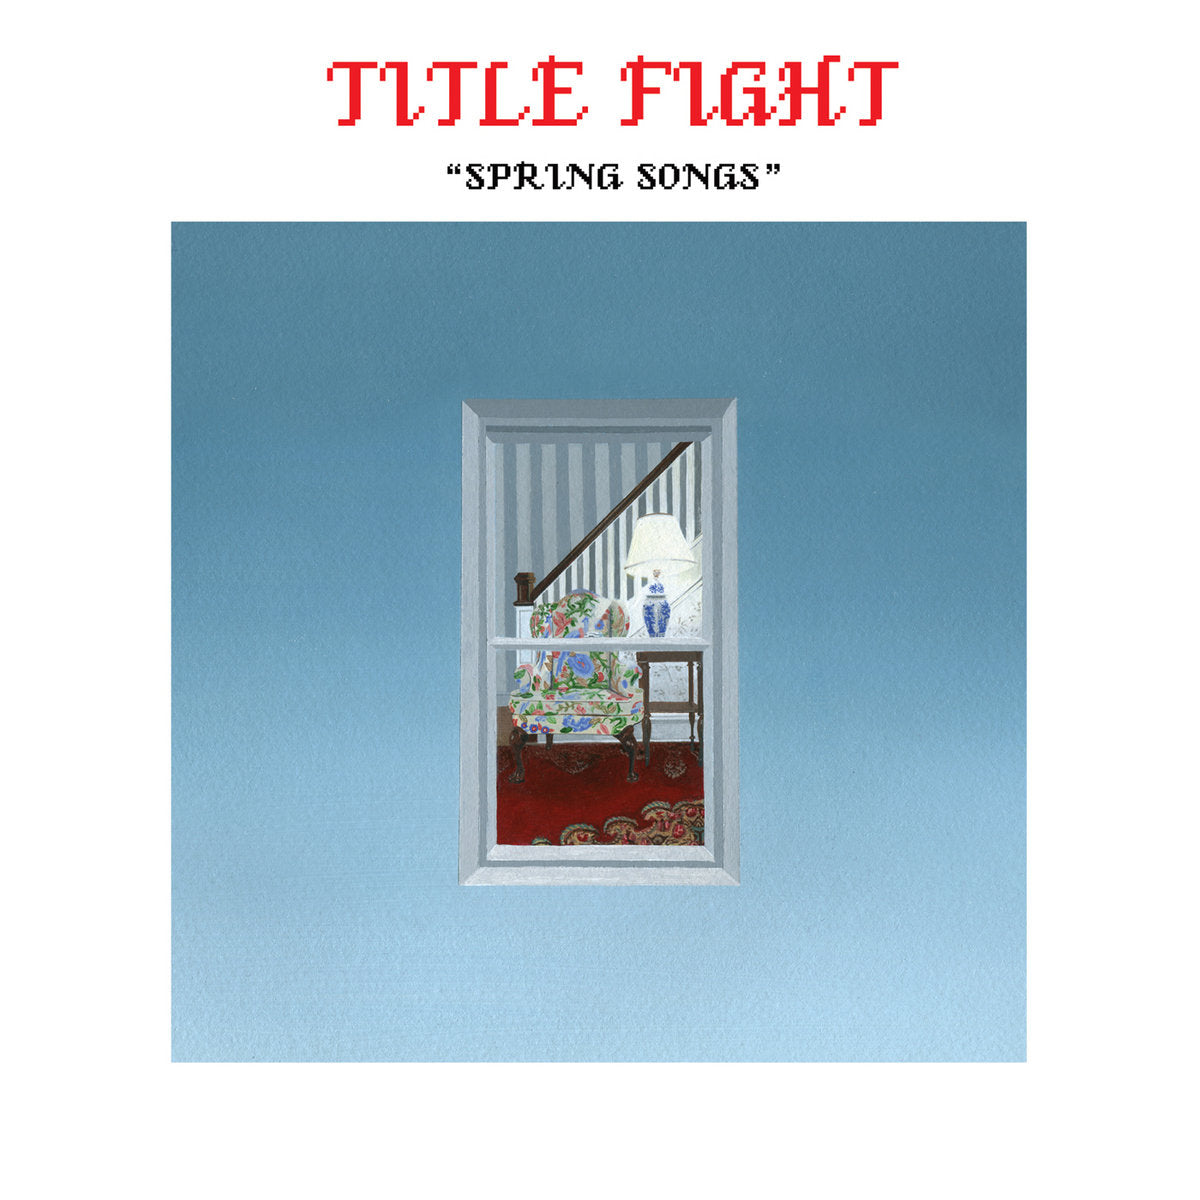 TITLE FIGHT "Spring Songs" 7"